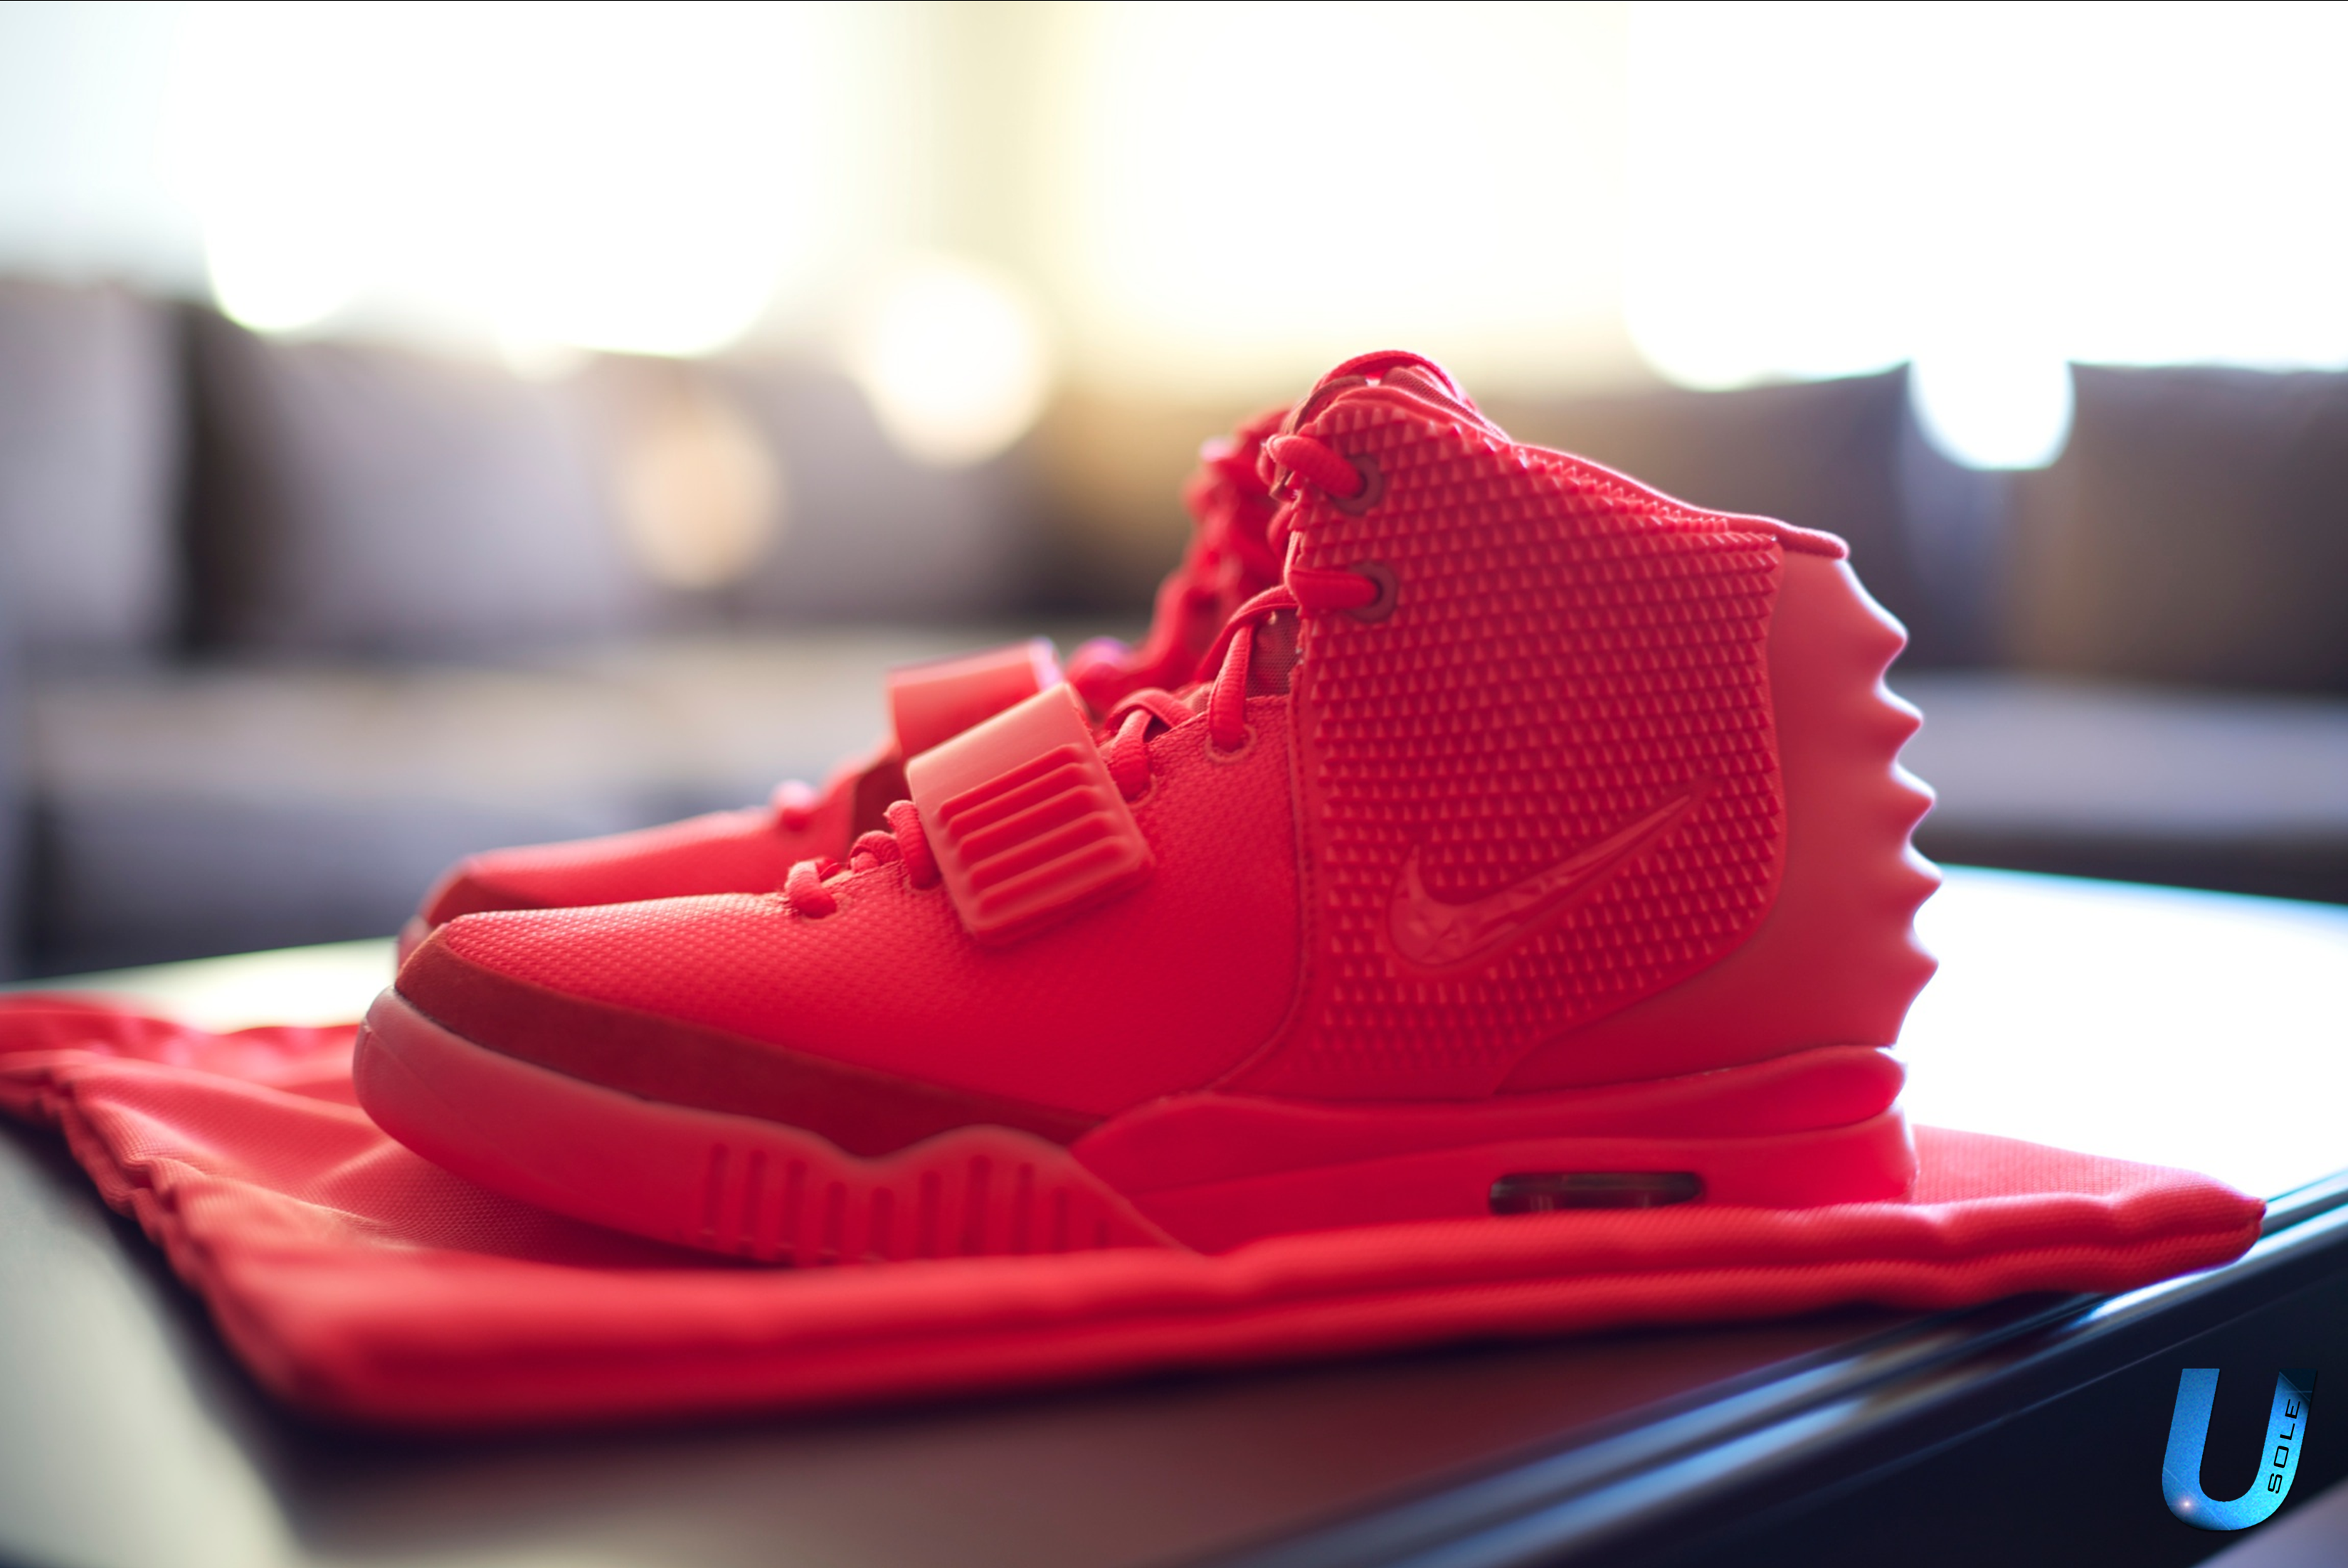 nike air yeezy 2 red october price in india